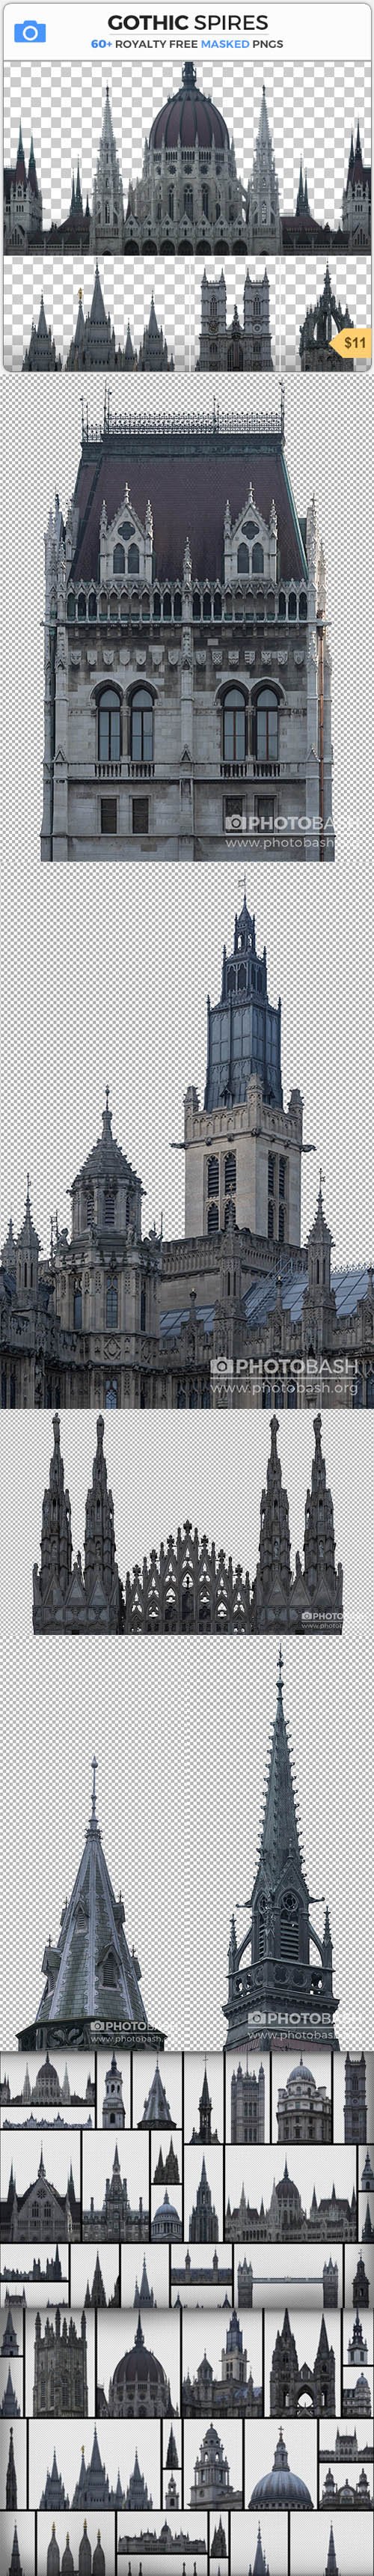 GOTHIC SPIRES - 60+ Royality Masked PNGs + Photoshop Shapes CSH